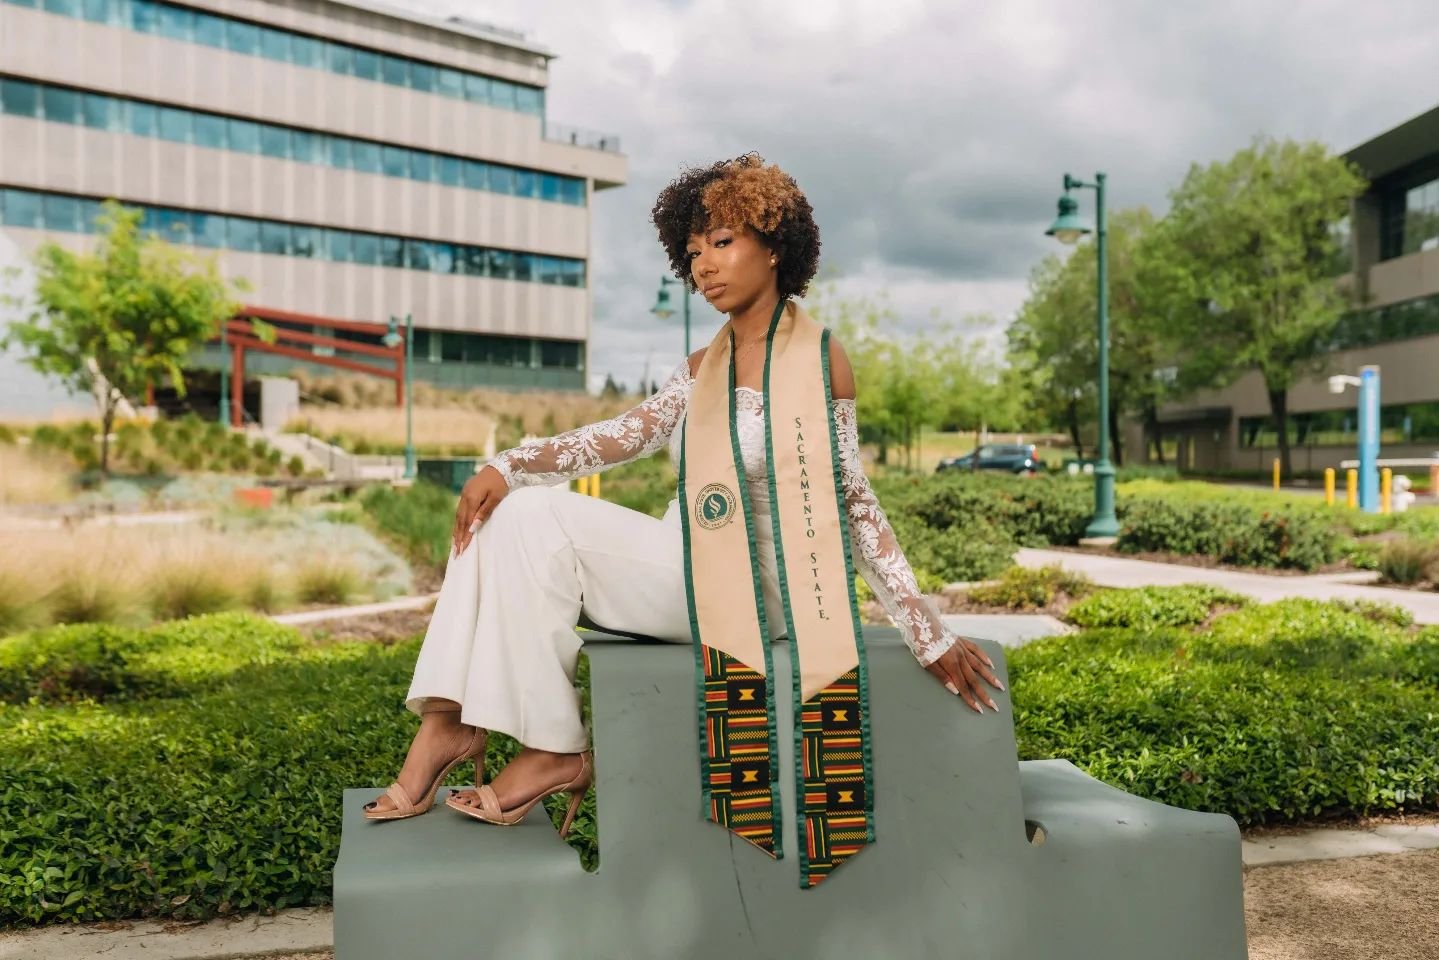 Although this Sacramento weather has been bipolar, these graduation pics still are turning out 🔥!
#graduationphotoshoot #sacstate #ucdavis #sacstatephotographer
.
.
.
.
.
.
.
.
.
#sigma #sigma85mmf14 #sigma85mmart
#trending #igtv #trendingnow #trend